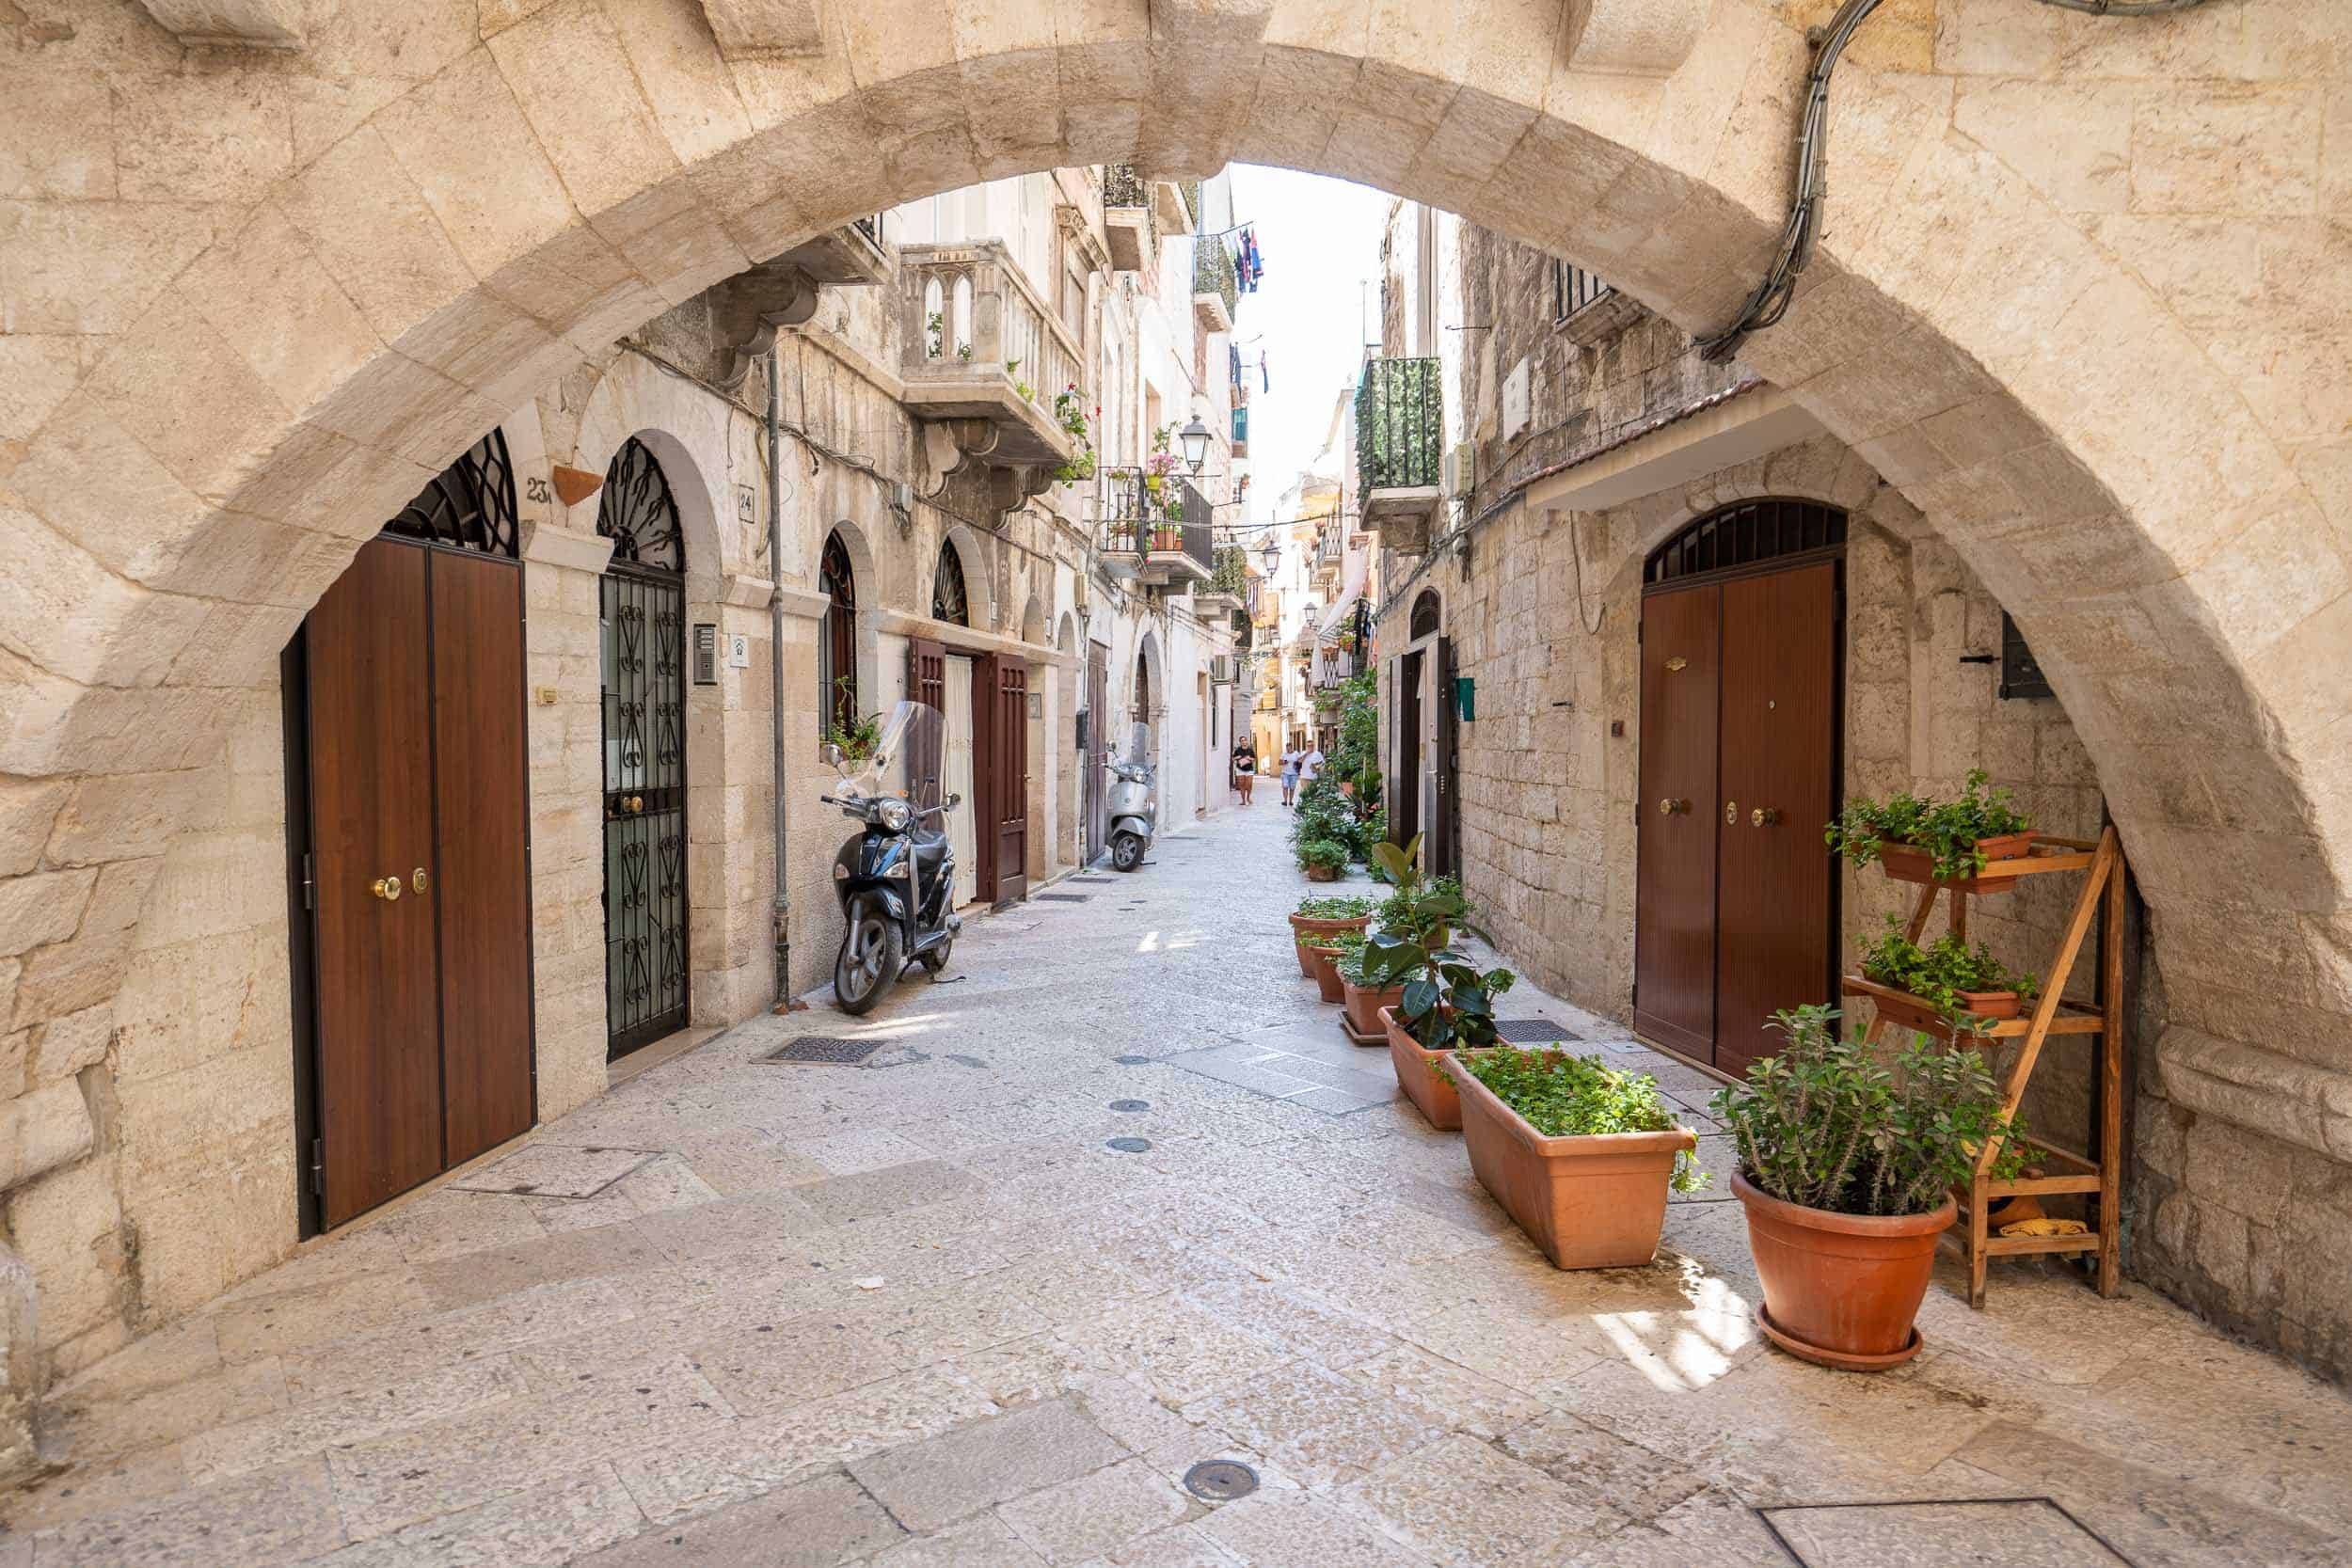 Stone archway in a narrow street of Bari Vecchia. Wandering here is one of the best things to do in Bari Italy.